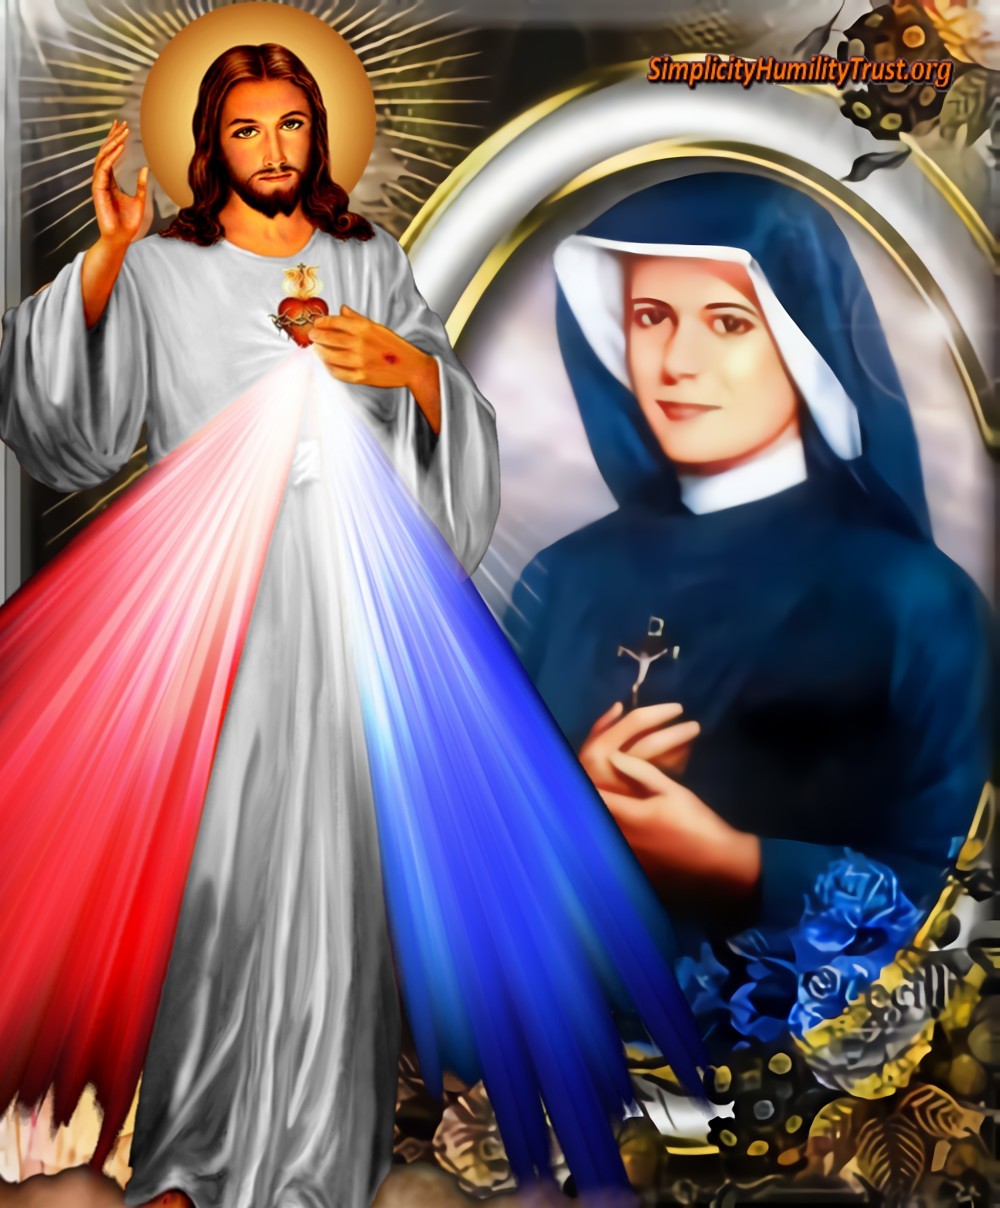 St. Faustina, The Apostle of Divine Mercy.